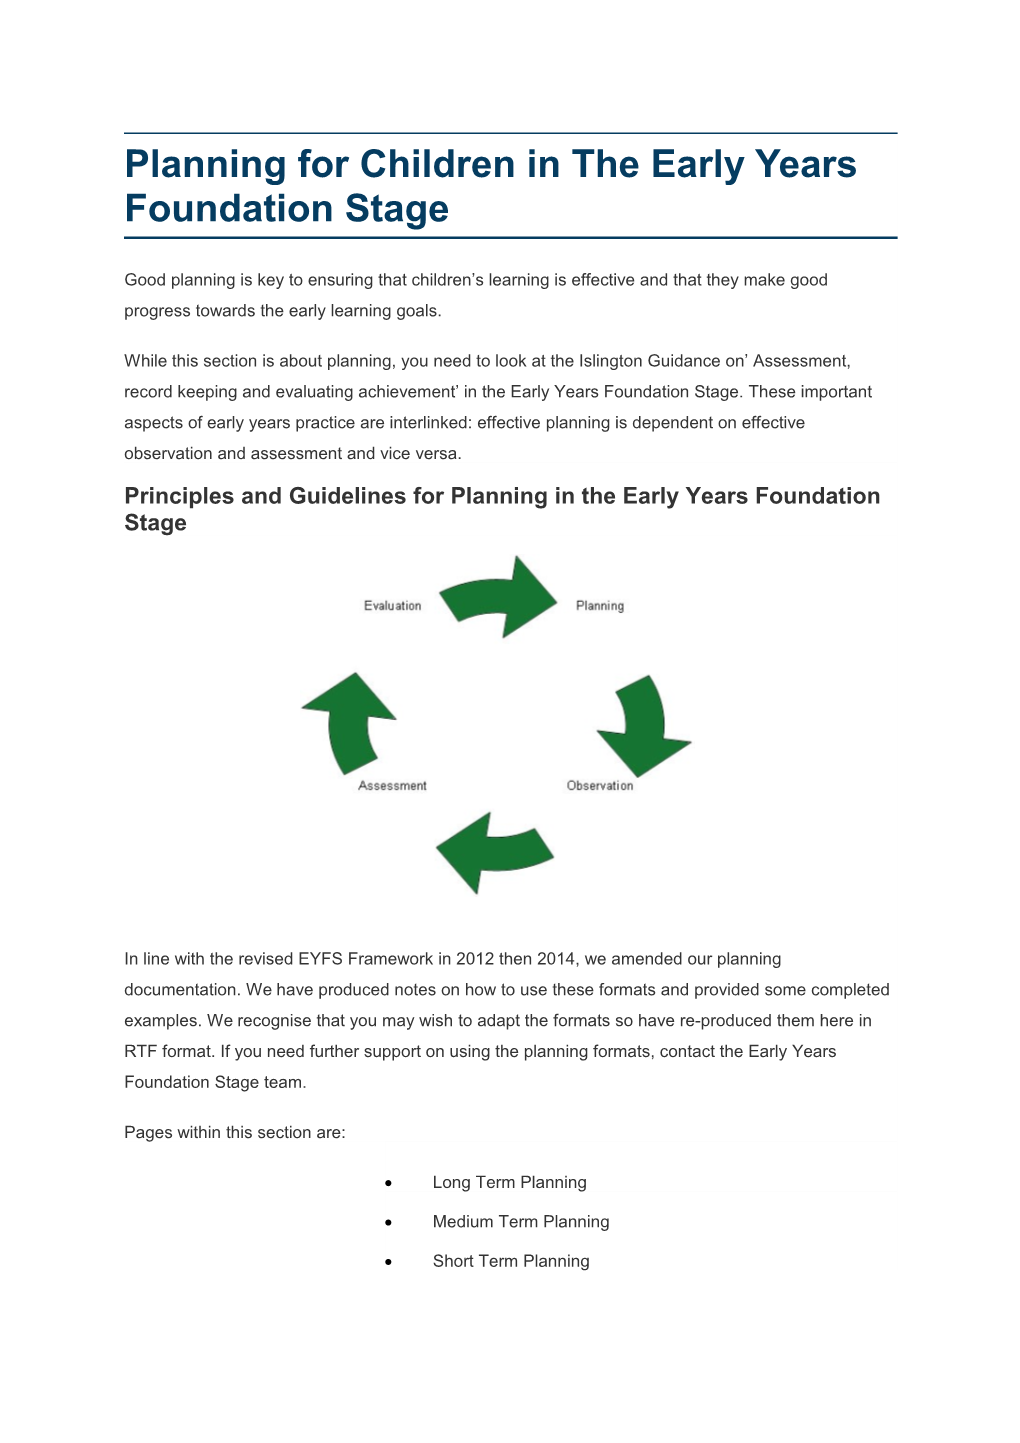 Planning for Children in the Early Years Foundation Stage 2016